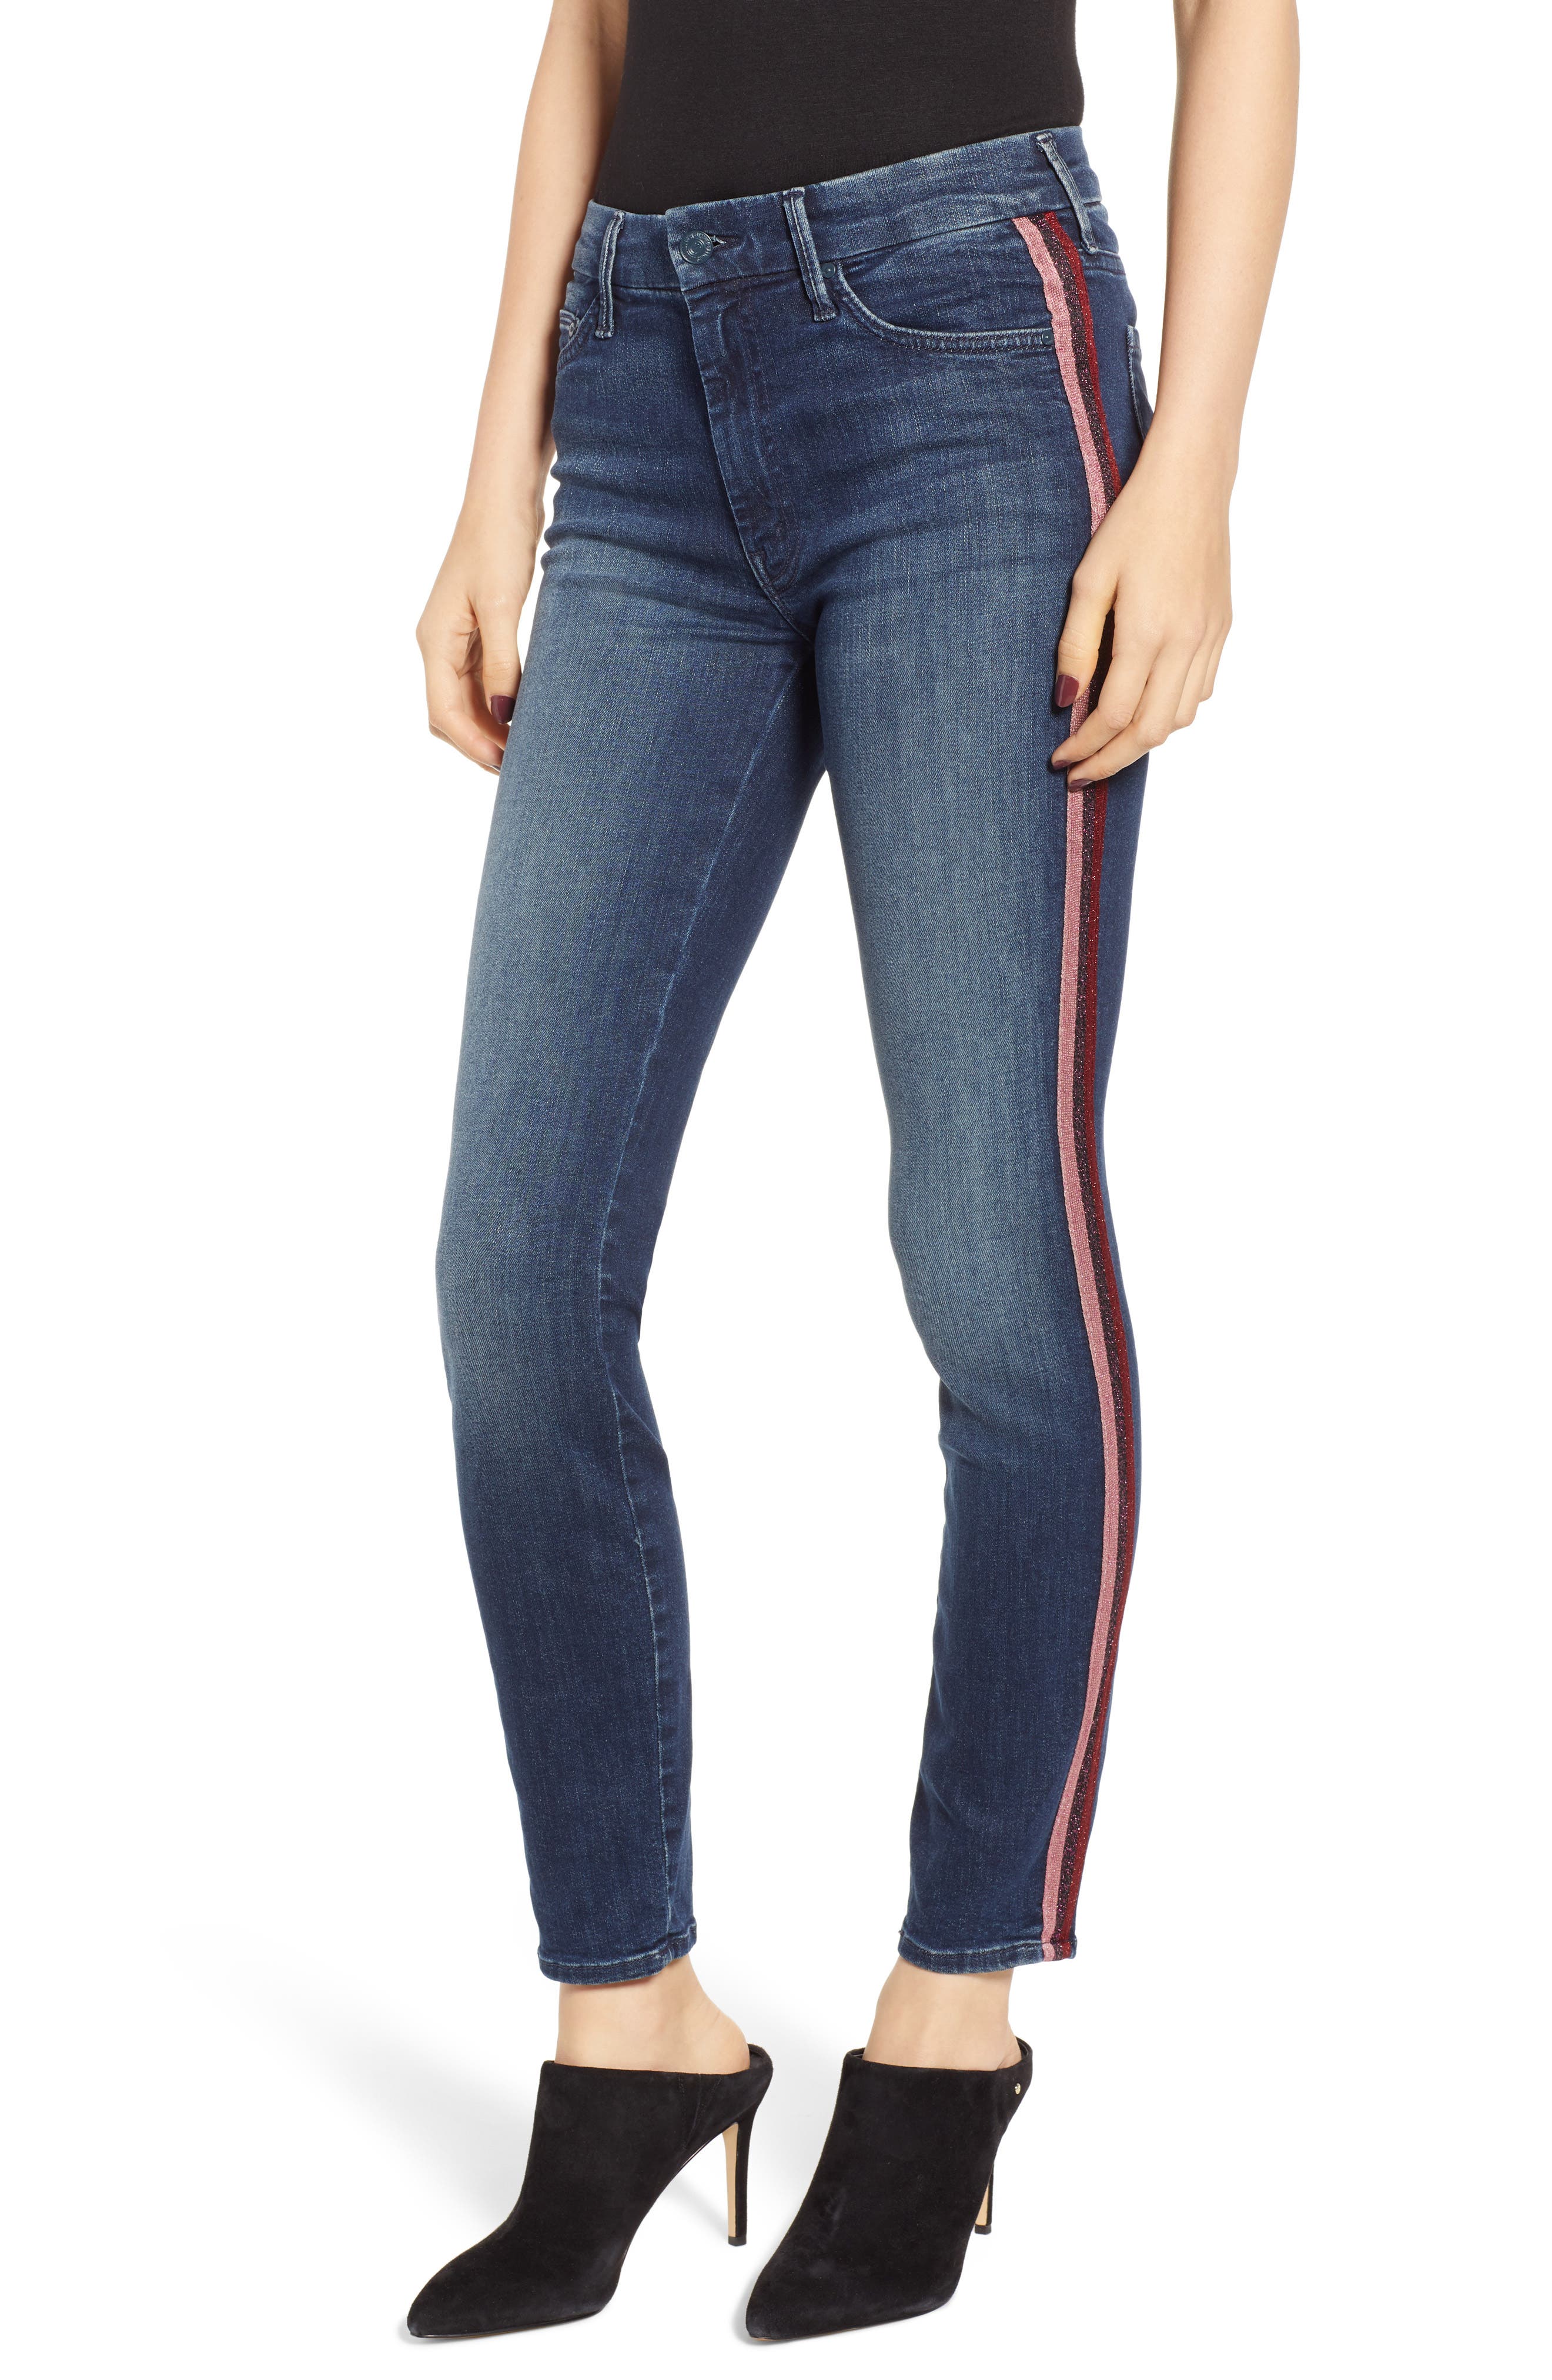 mother jeans with side stripe